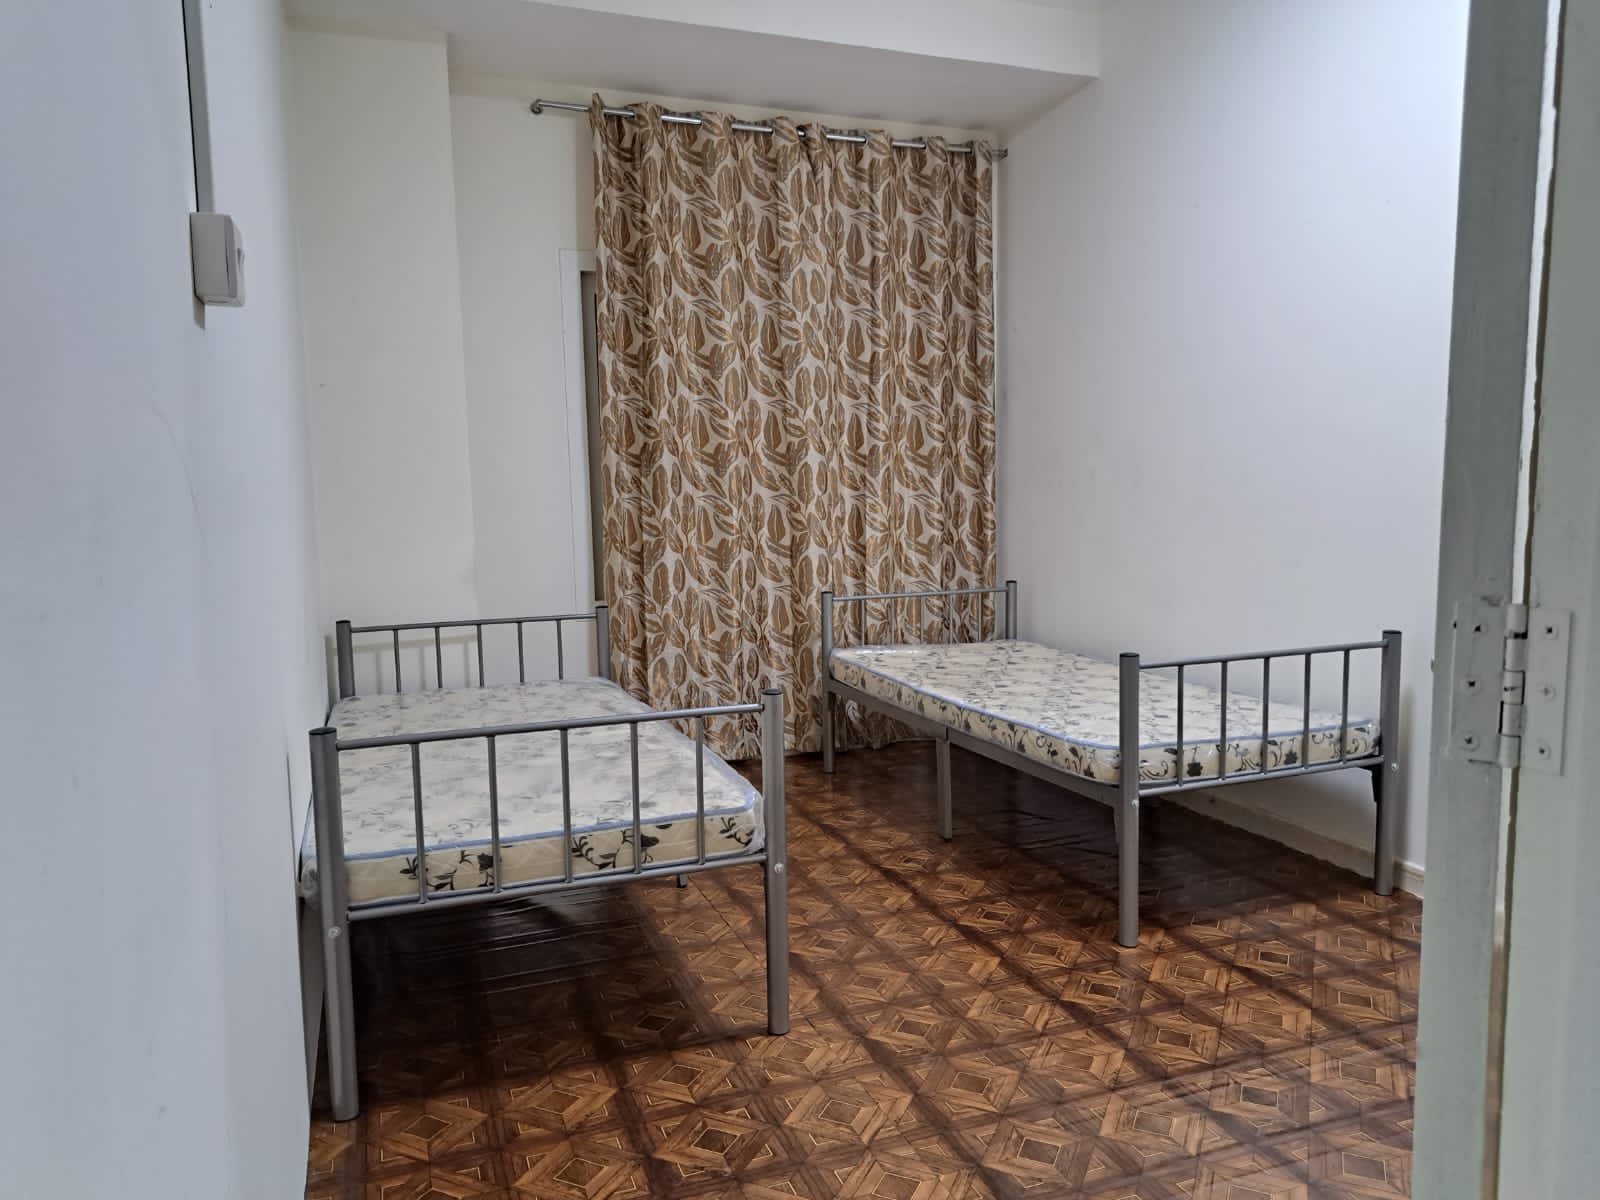 3000 Per Month Including Dewa Fully Furnished Room Available In Karama Suitable For 3 Executive Bachelors